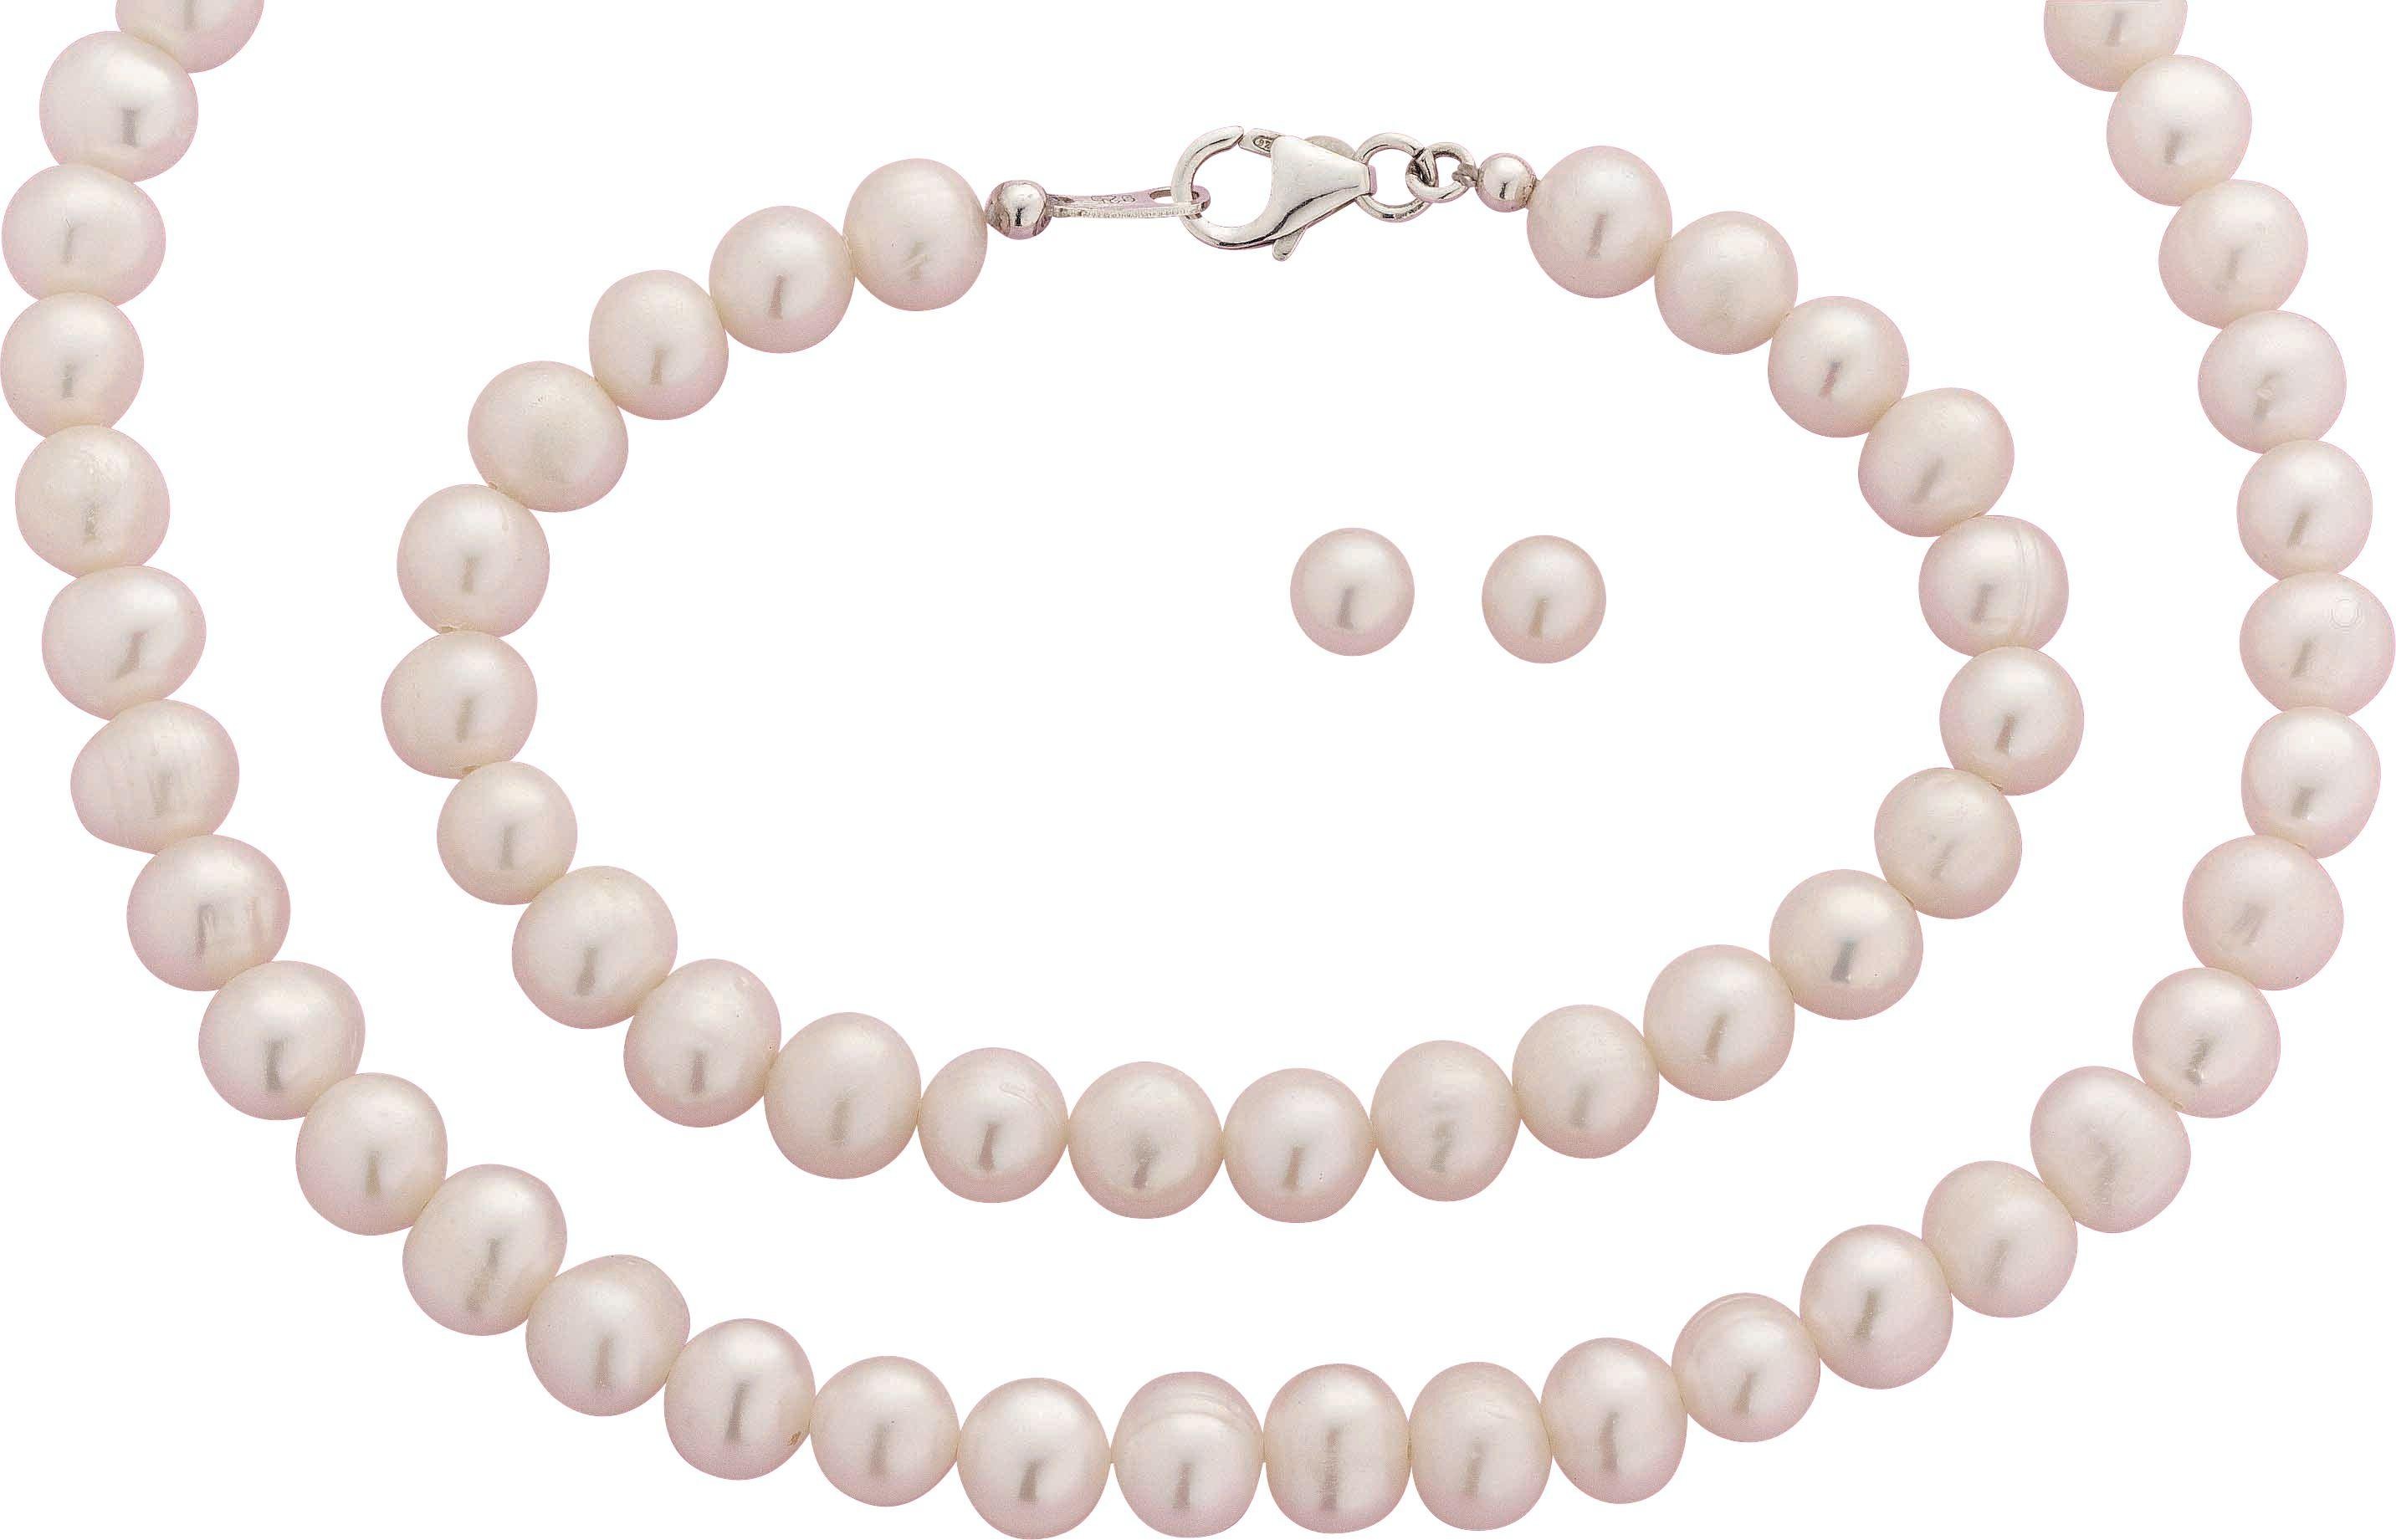 Revere Sterling Silver and Freshwater Pearl Jewellery Set